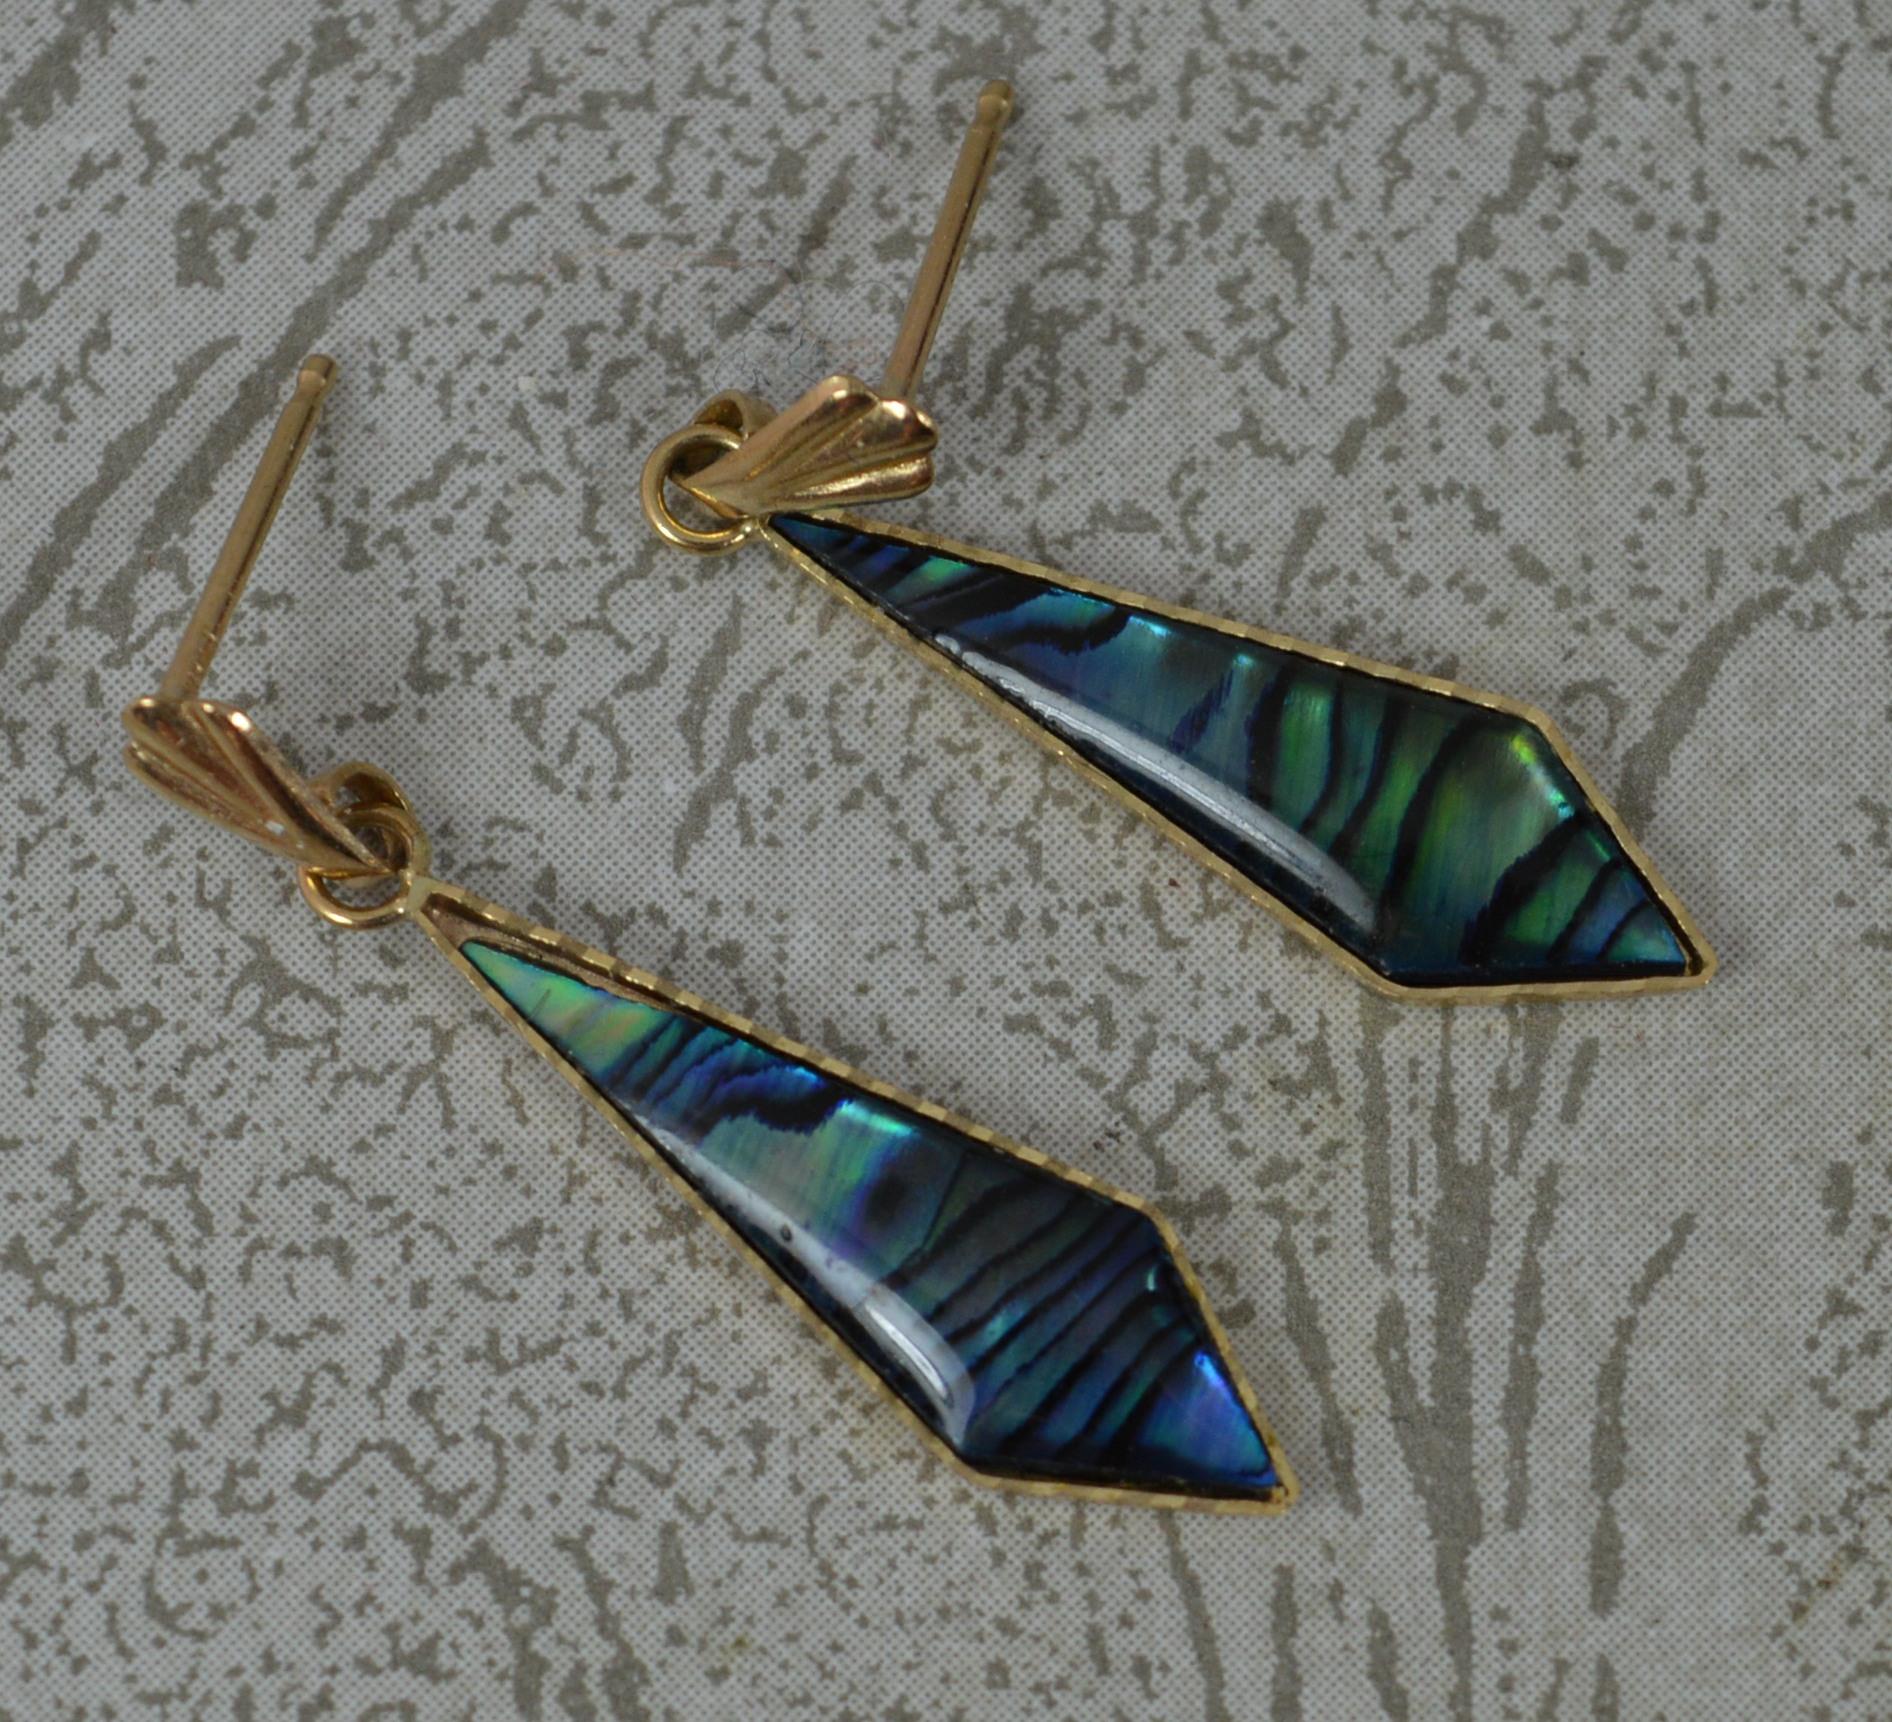 A superb drop dangle pair of earrings.
Solid 9 carat yellow gold example.
Set with a single abalone shell to each earring.
6mm x 20mm stone approx.
Condition ; Excellent. Clean and polished. Well set stones. Working back.
Please view photographs